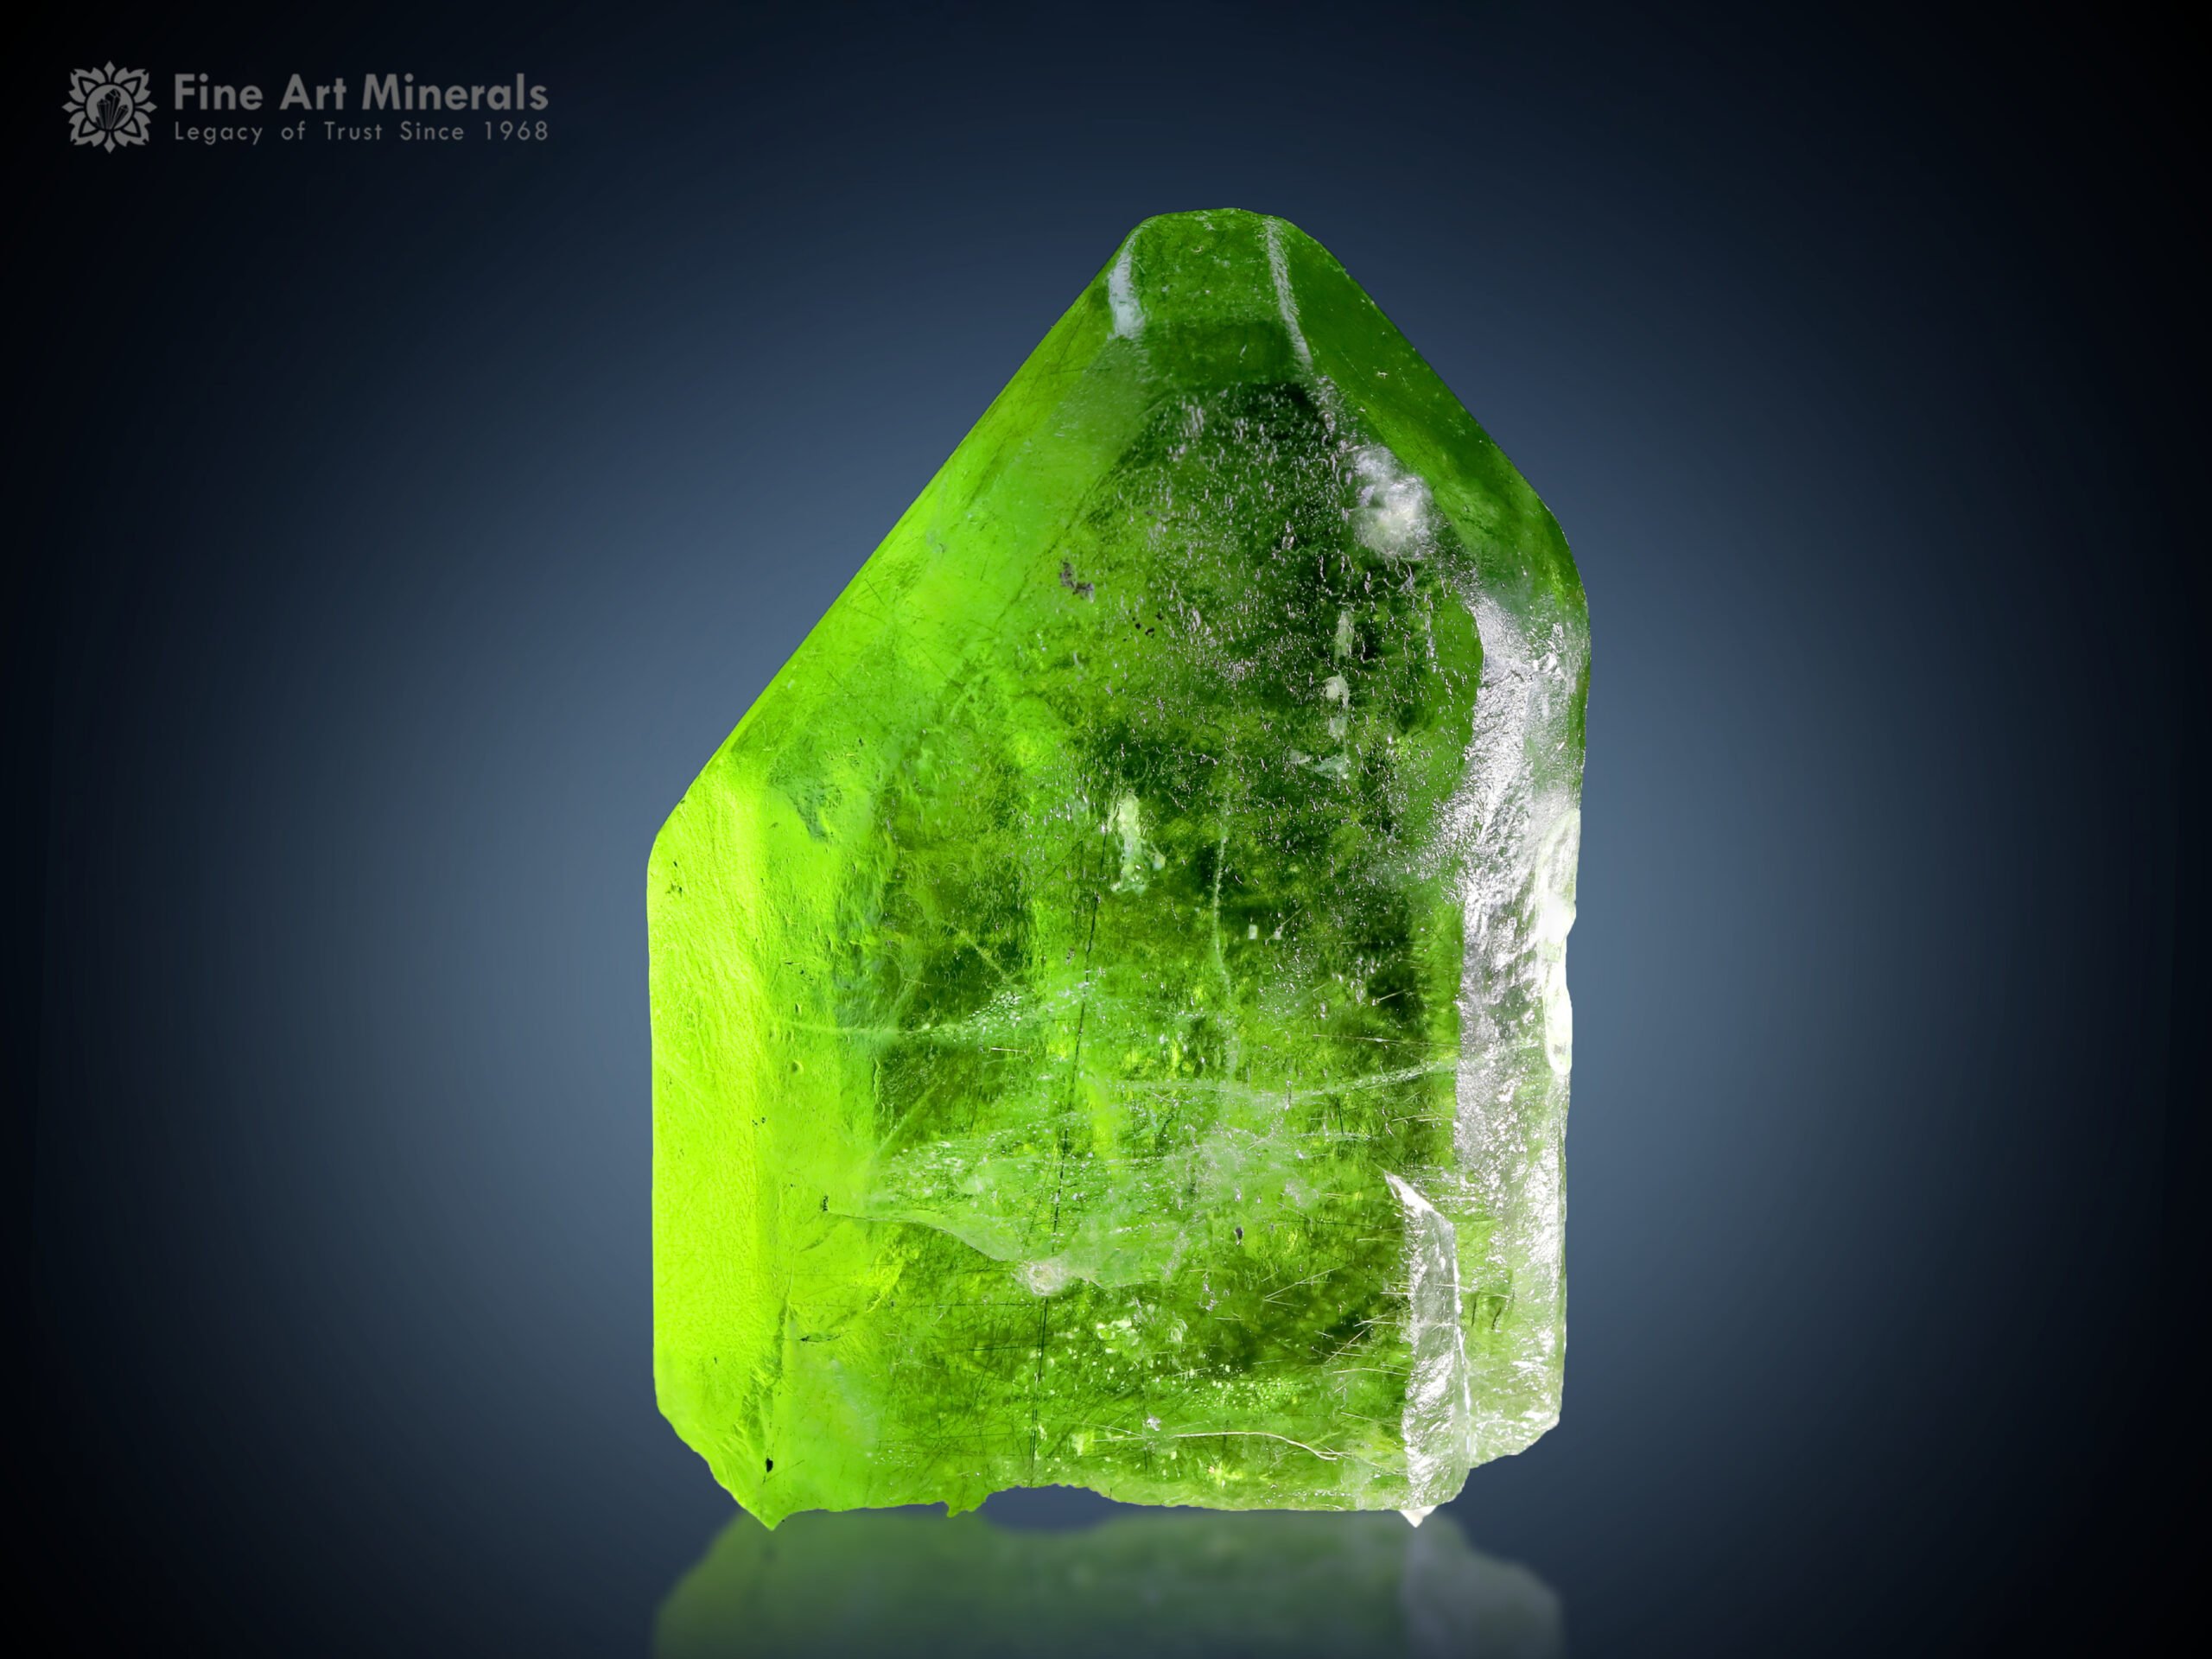 Peridot with Ludwigite Inclusion from Pakistan